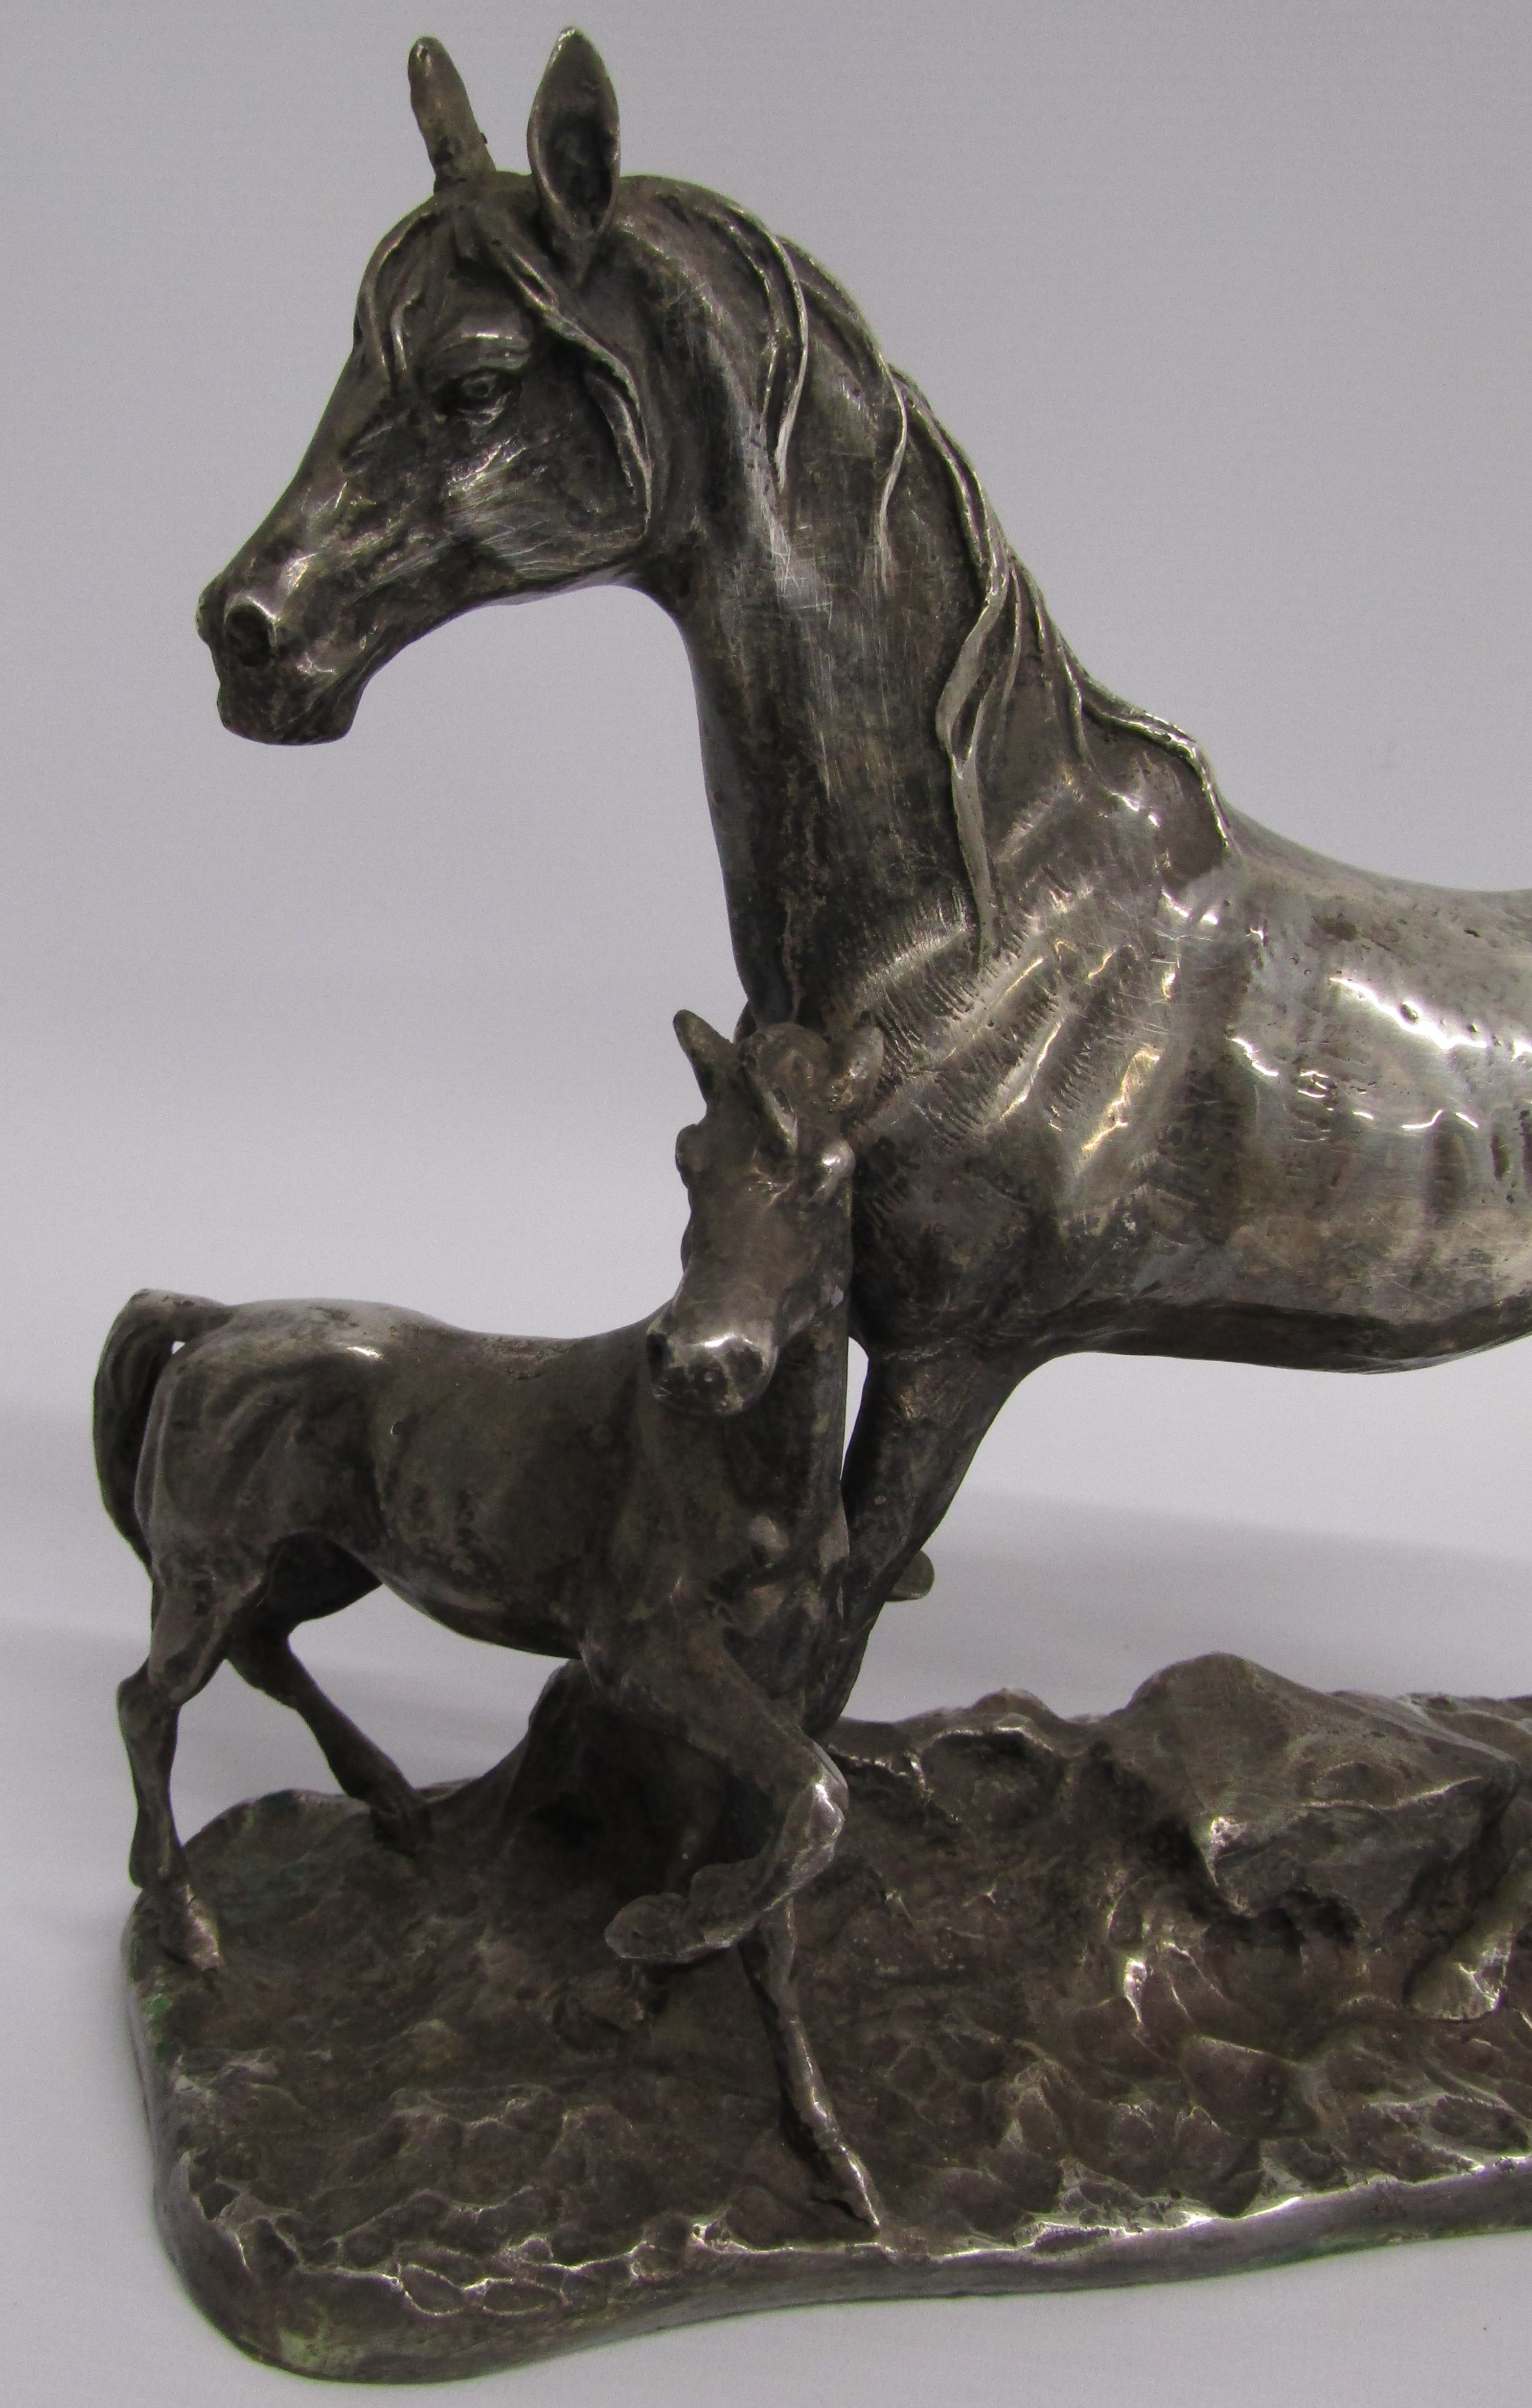 Horse and foal silver plated cast figurine - approx. 24cm x 21.5cm x 9cm - Image 5 of 5